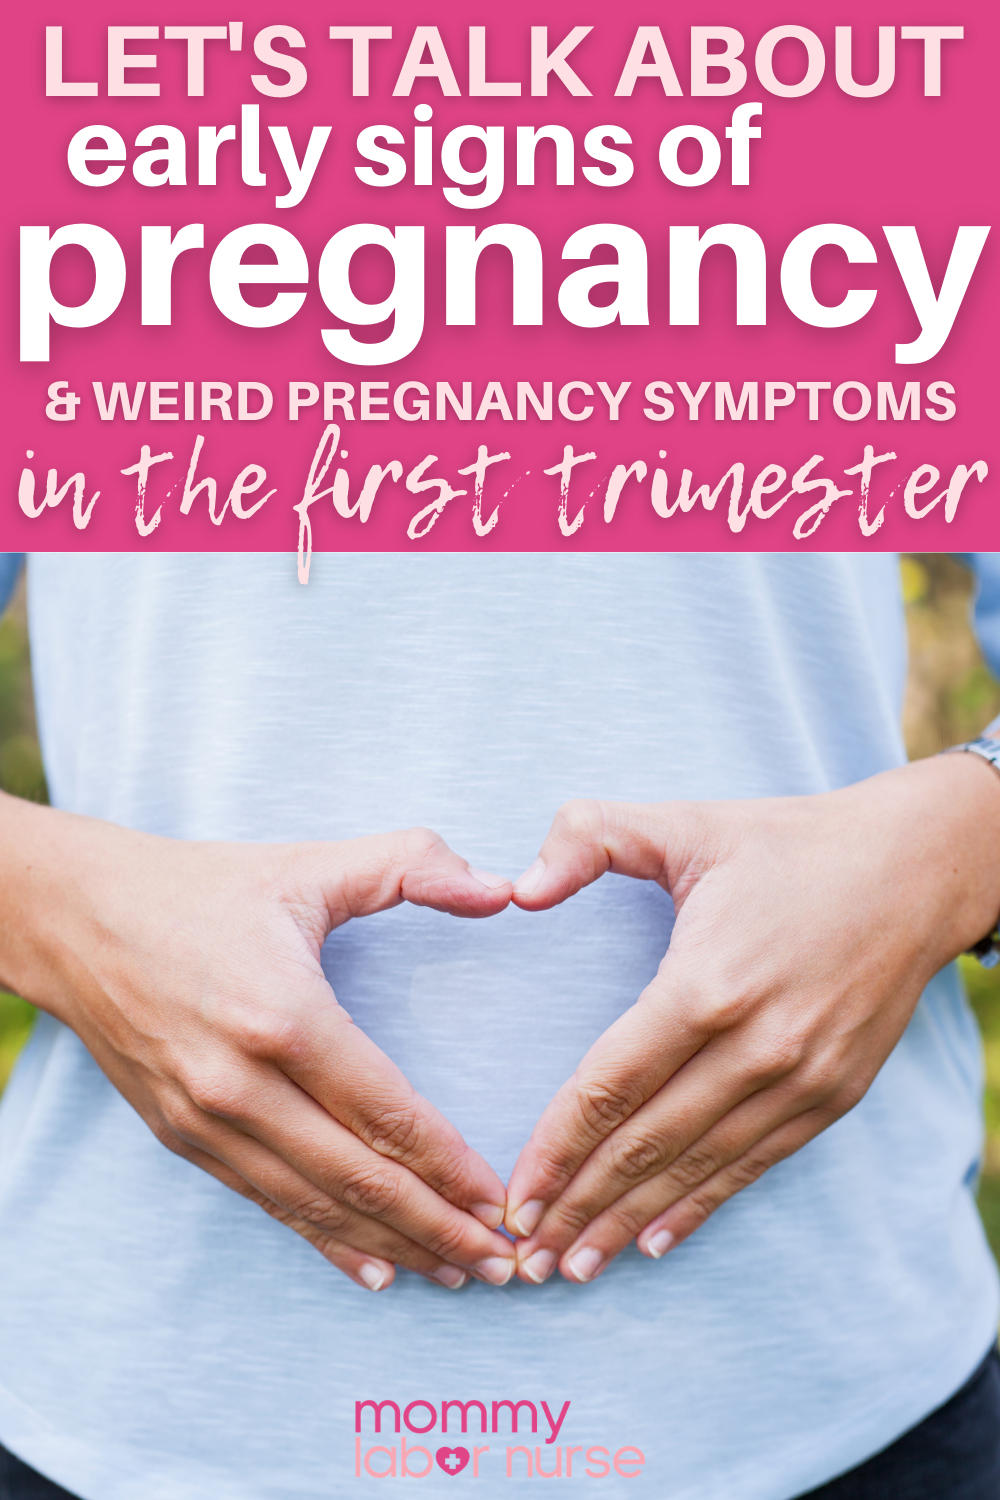 early signs of pregnancy, first trimester pregnancy, weird pregnancy symptoms, first trimester pregnancy symptoms